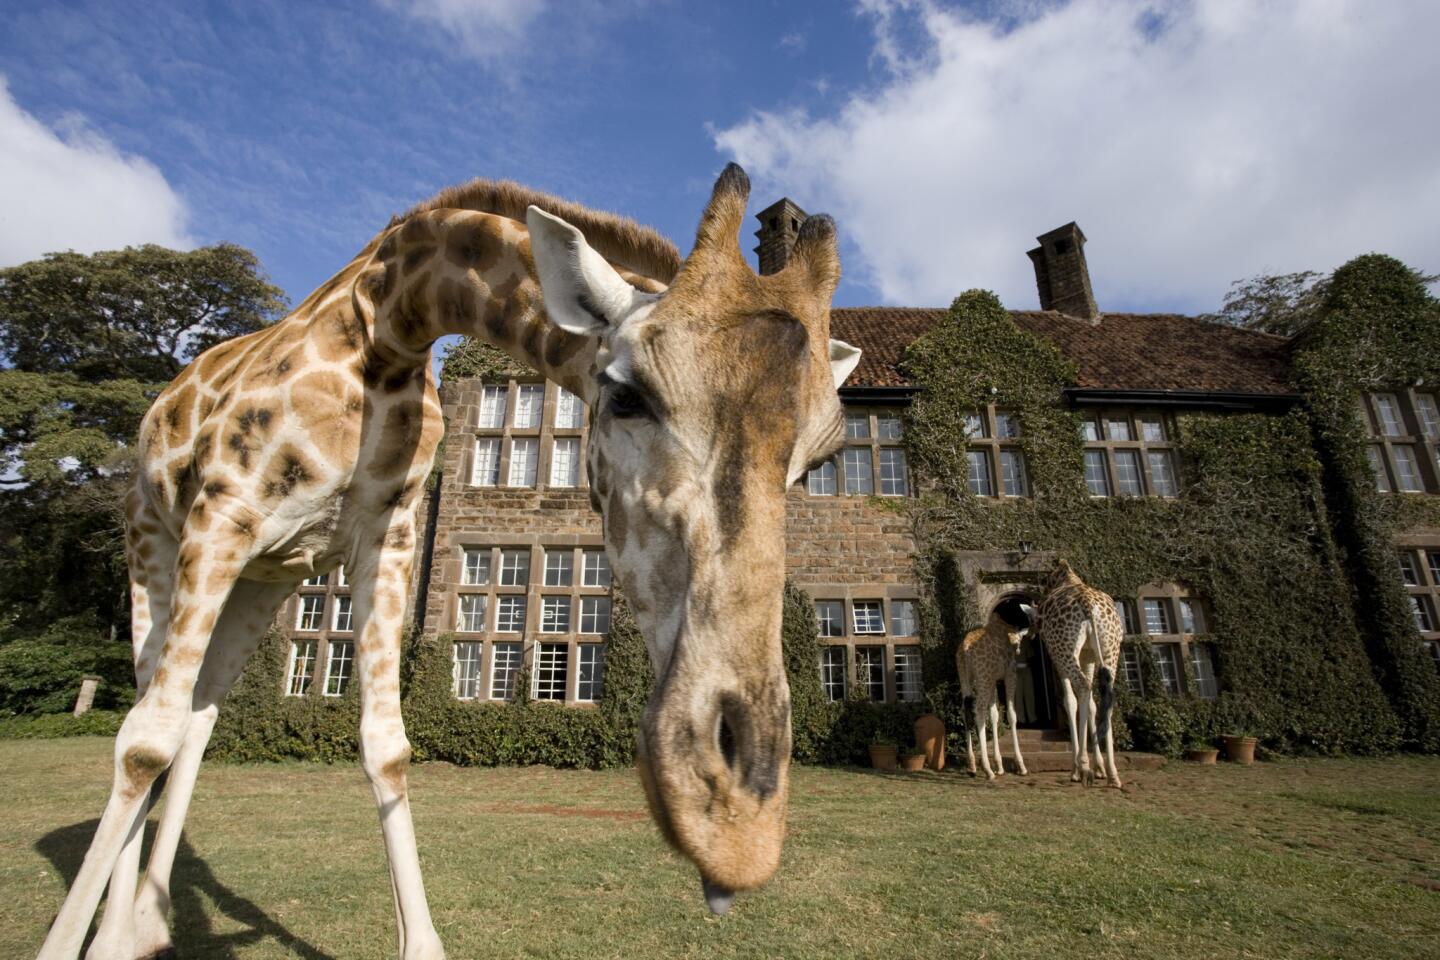 This is not your cookie-cutter luxury hotel. Sure, the stately manor boasts terraces, luxury rooms, an on-site massage therapist and gardens. But the surrounding grounds are home to a herd of giraffes who love to pop their heads through the windows and see what's going on inside. Guests may also enjoy sharing a meal with locals. Thesafaricollection.com